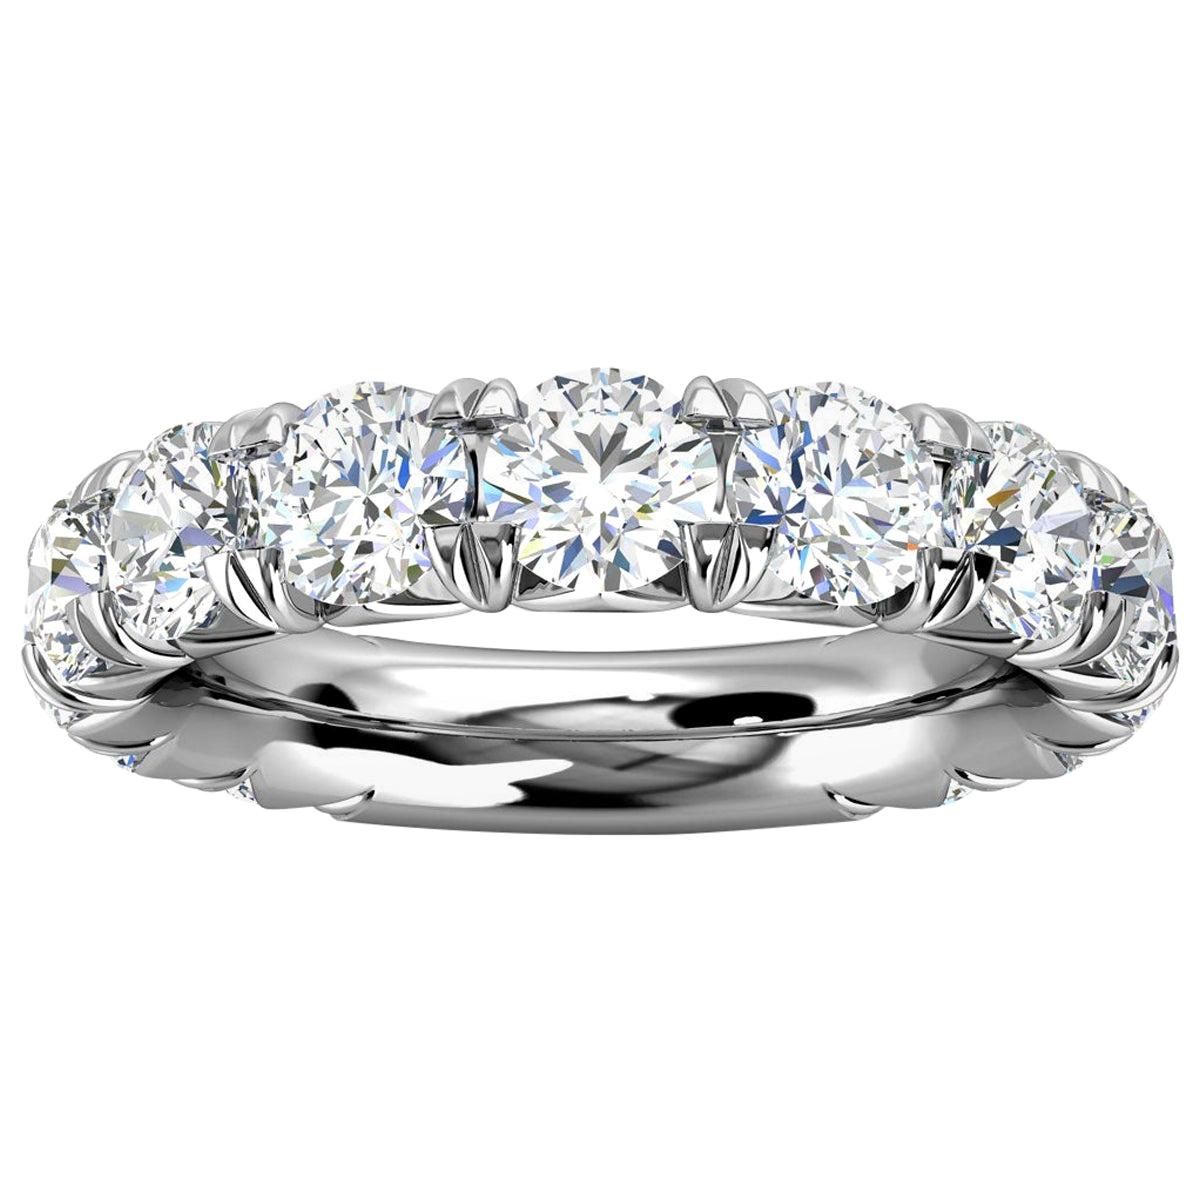 For Sale:  Platinum GIA French Pave Diamond Ring '3 Ct. tw'